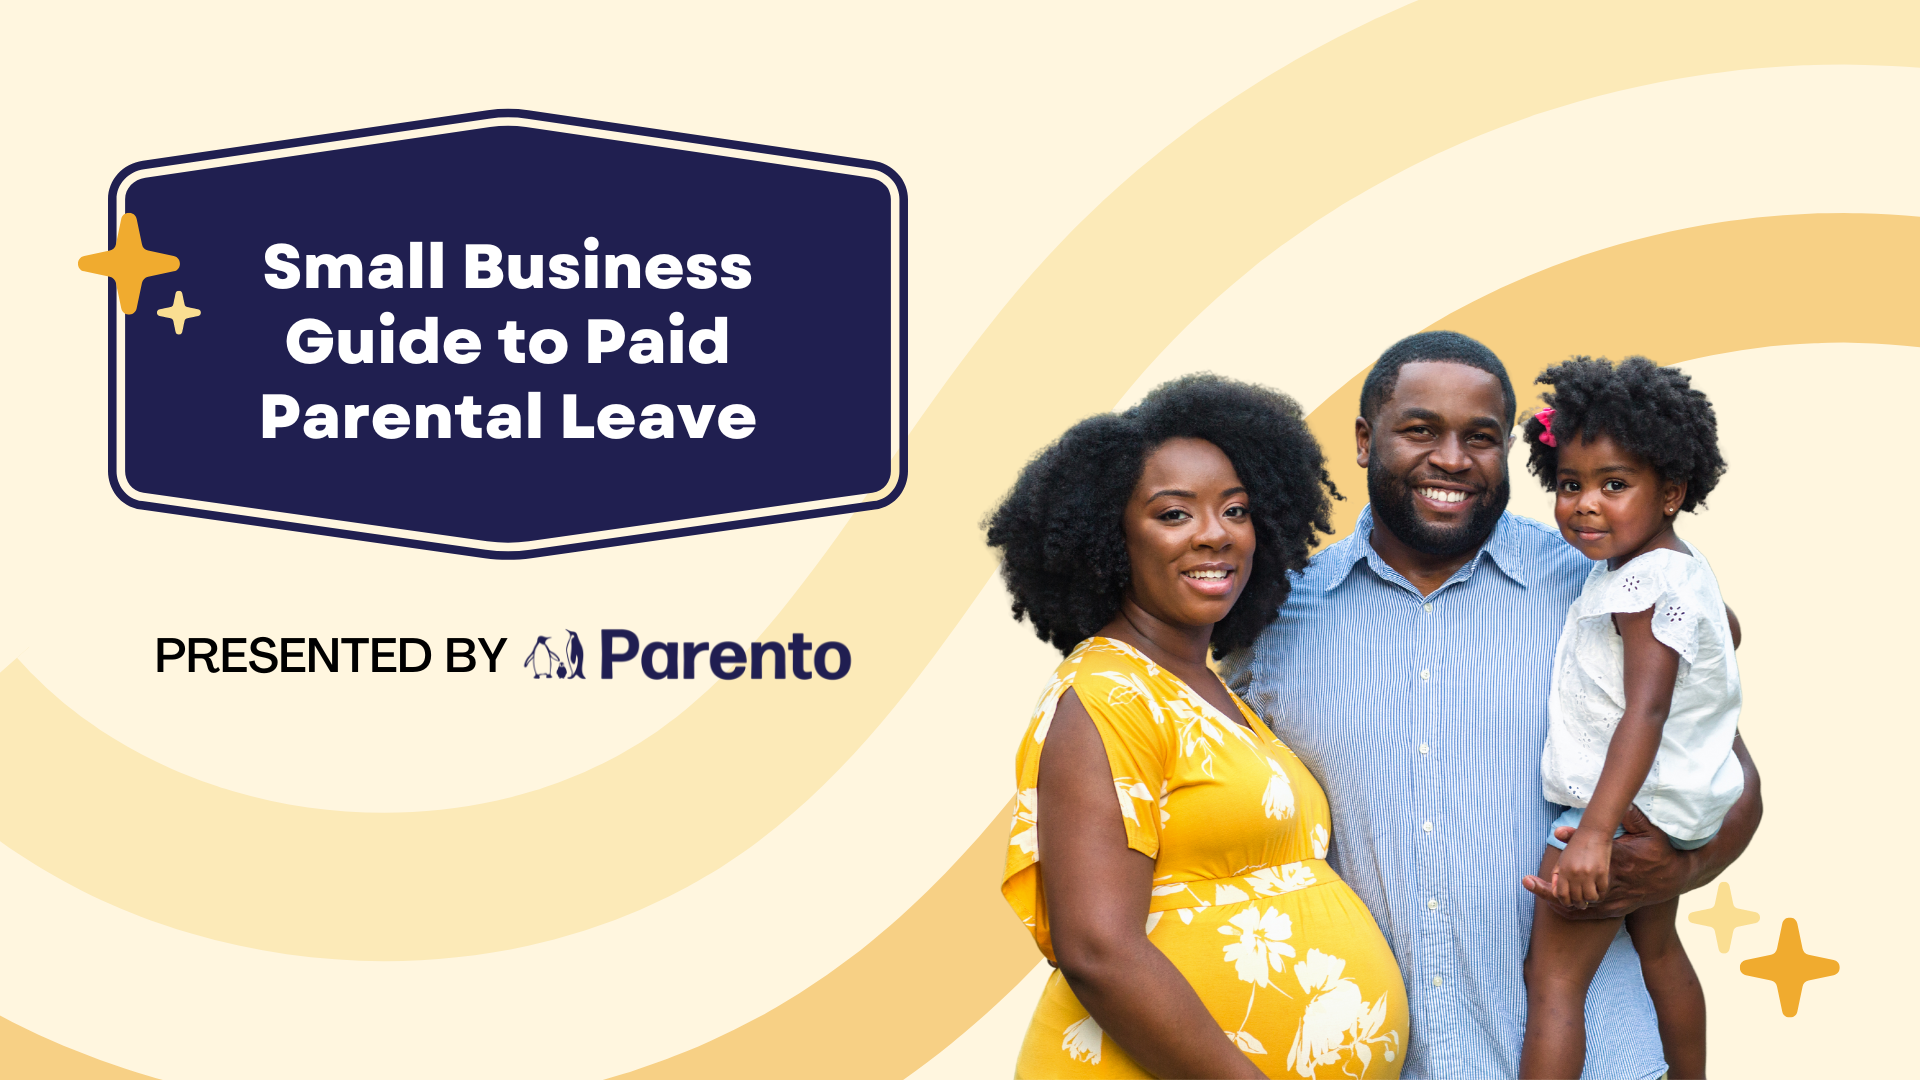 Small Business Guide to Paid Parental Leave